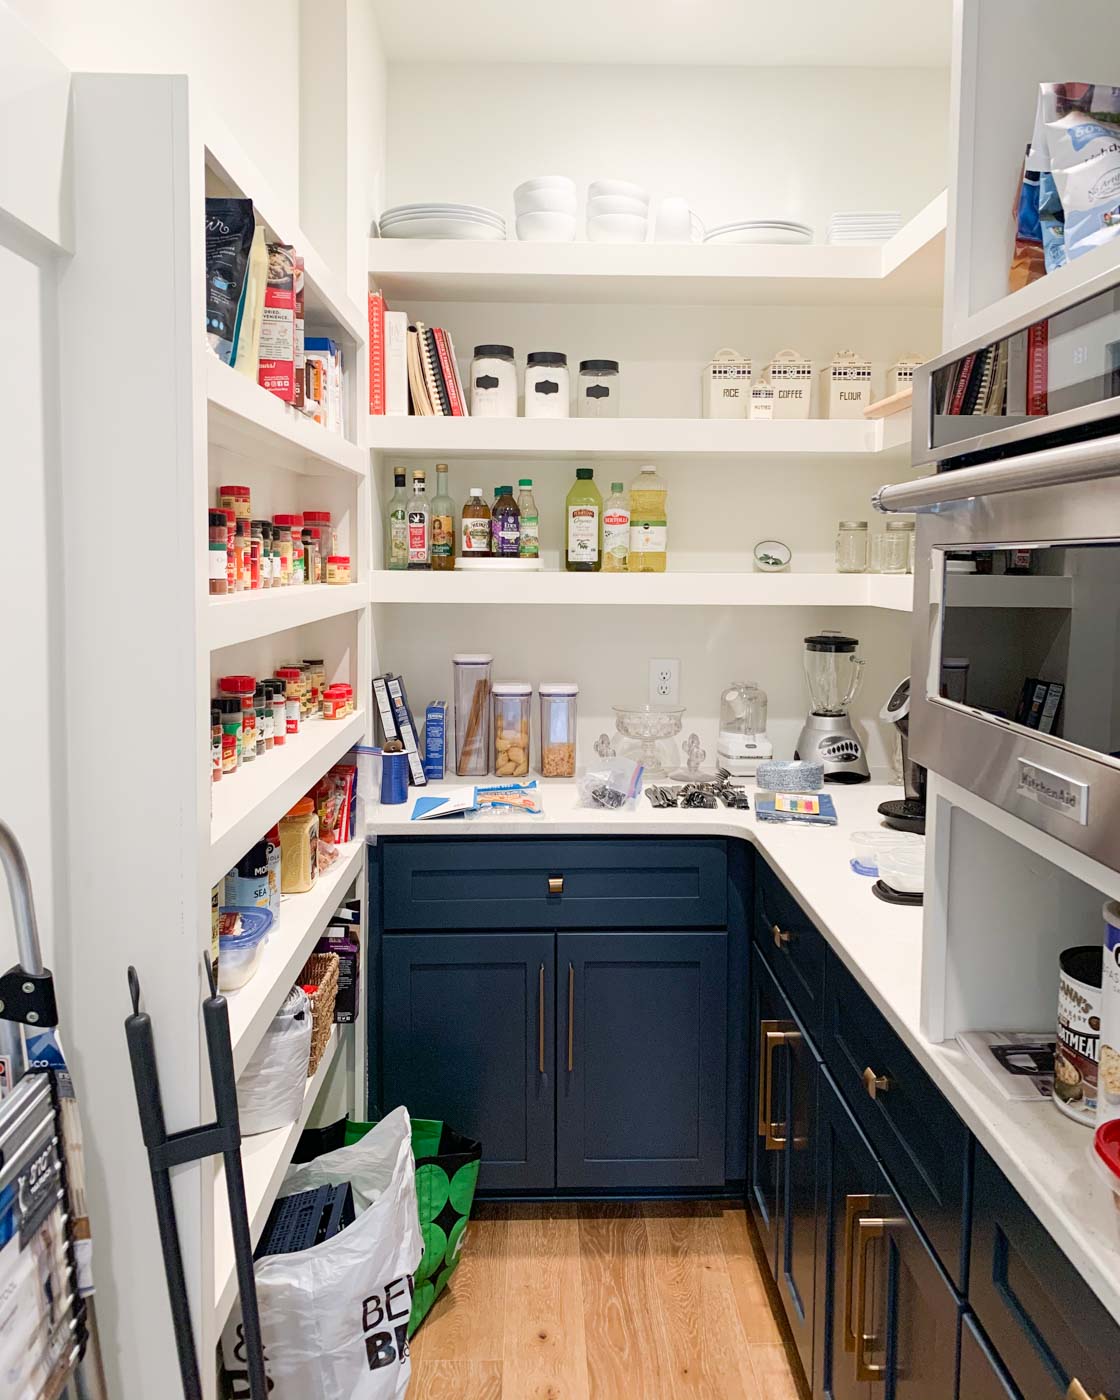 A before image of a kitchen pantry to demonstrate how to organize your pantry